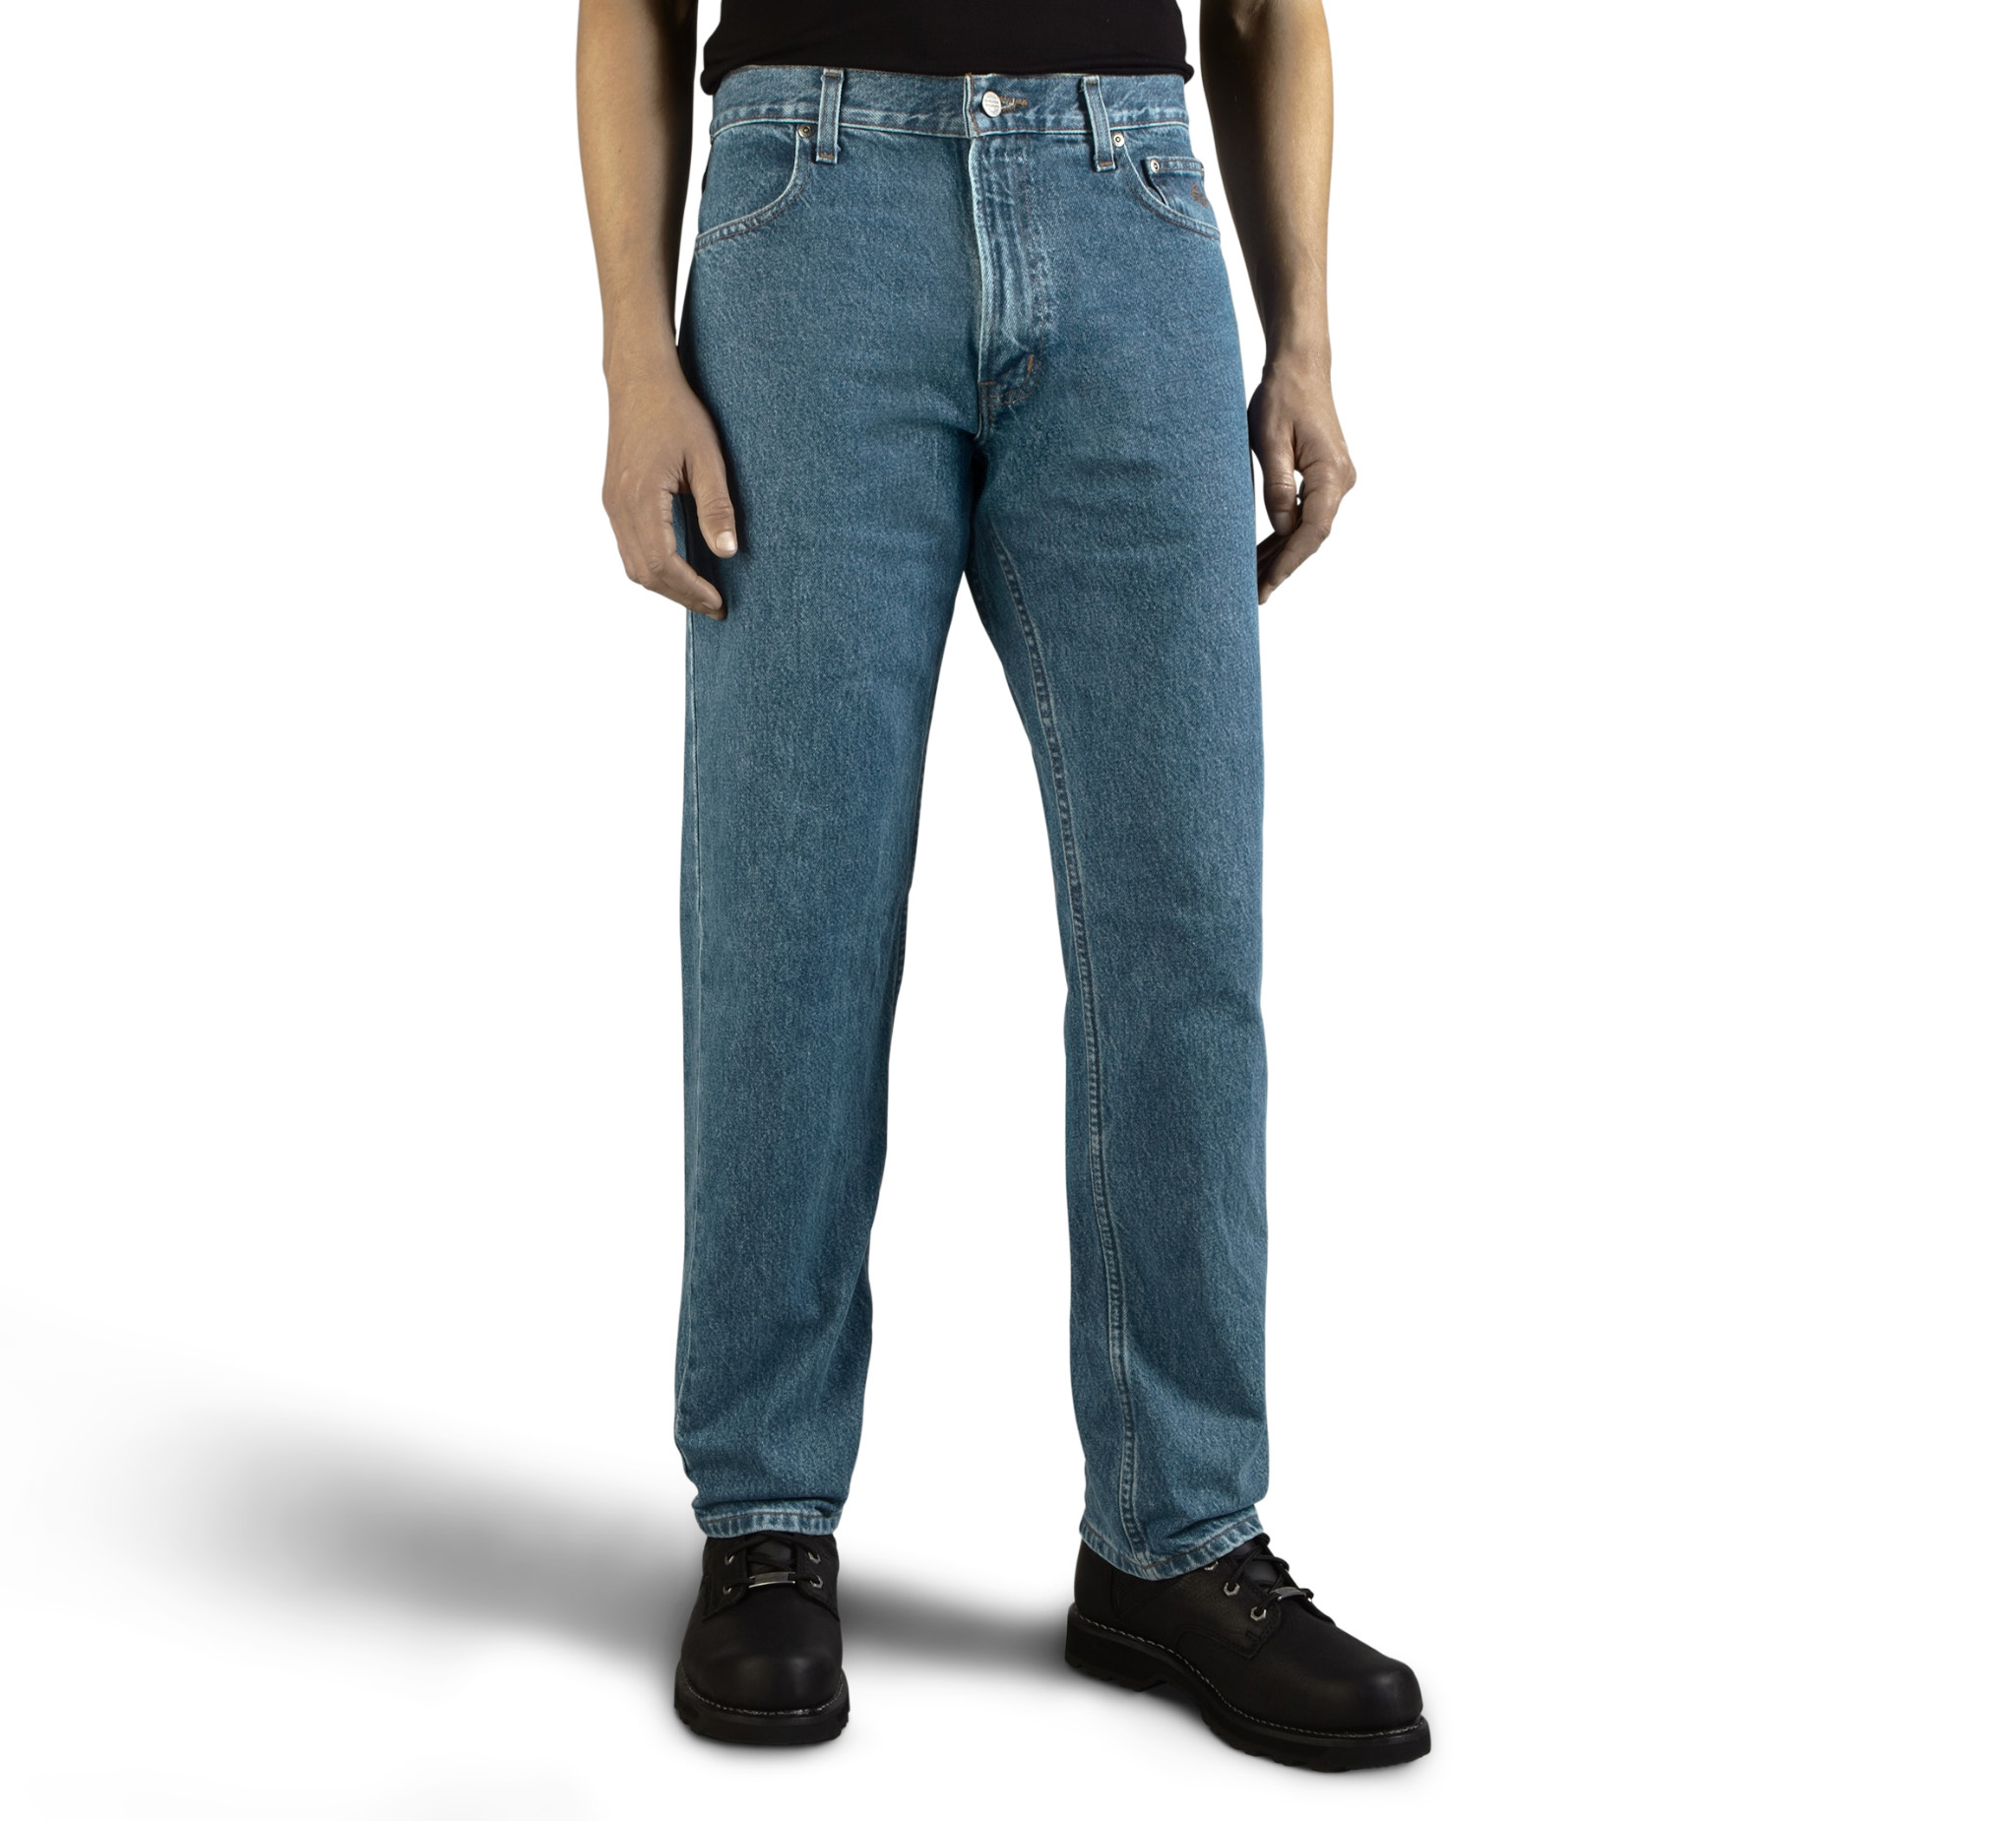 Relaxed Fit Tapered Leg Jean | Carhartt Reworked